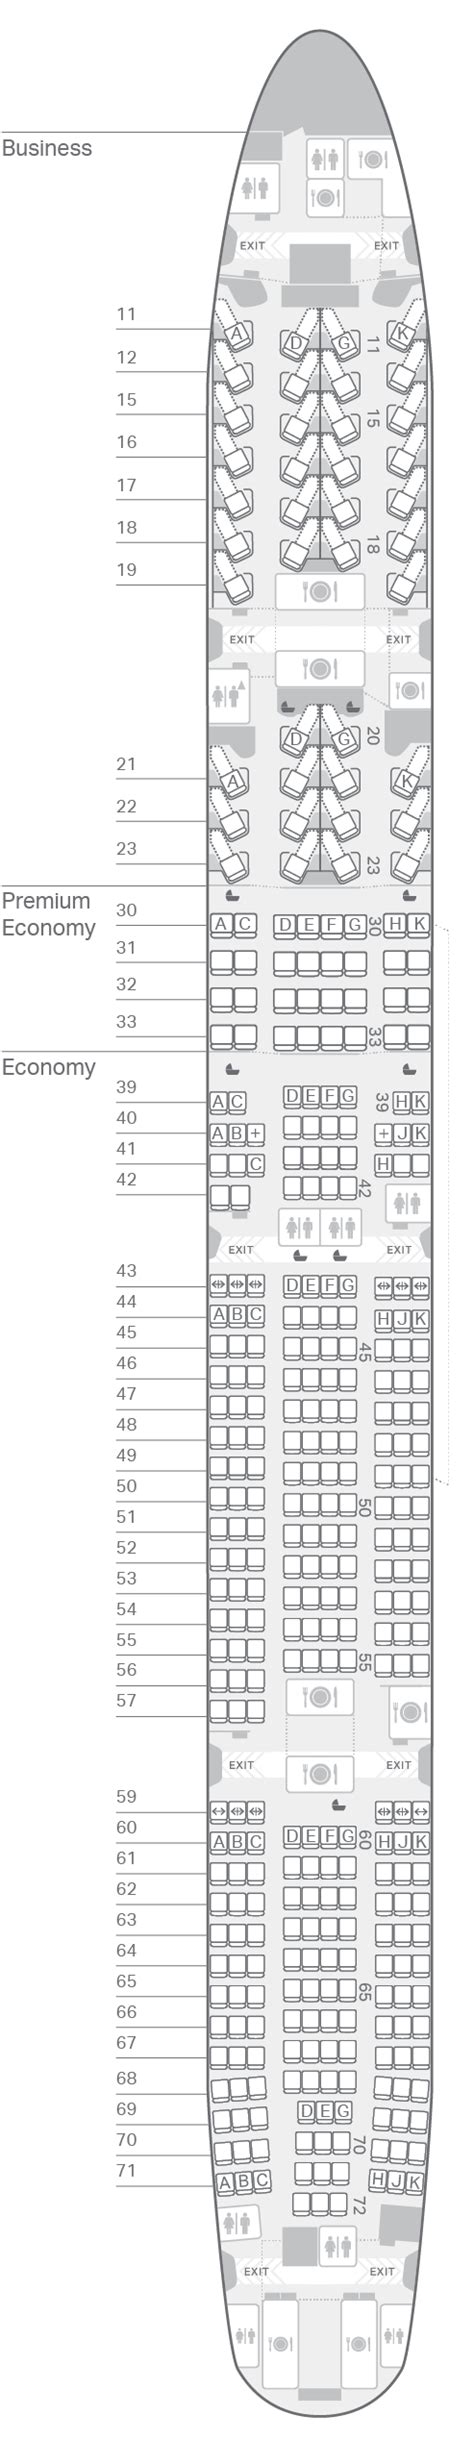 Cathay Pacific Boeing Seat Map Updated Find The Best Seat Seatmaps Lupon Gov Ph